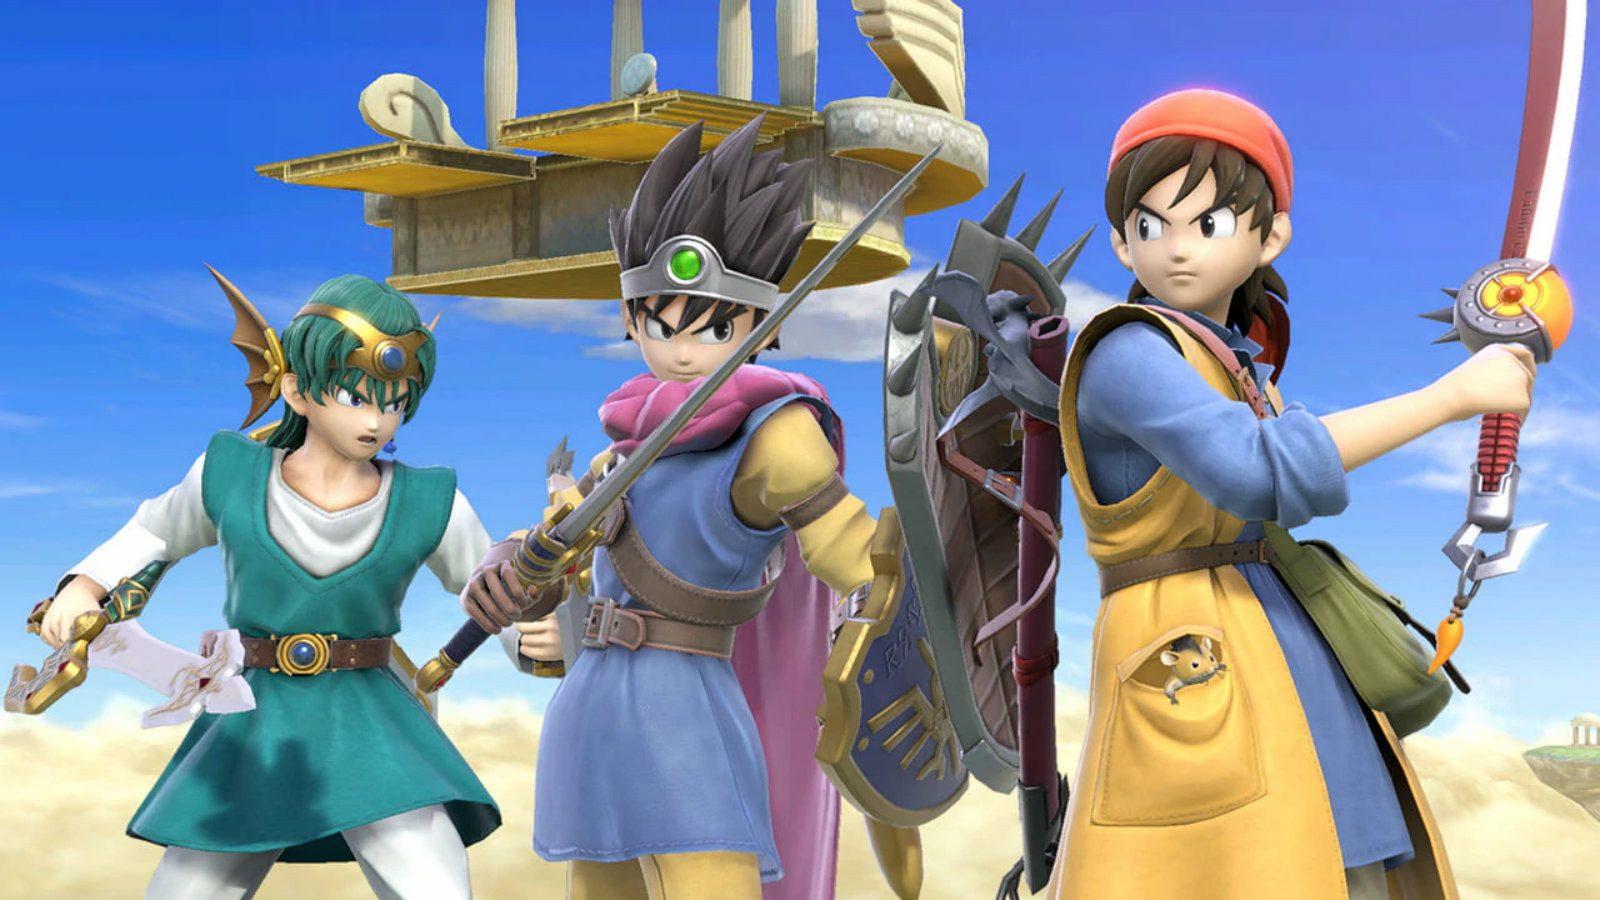 Dragon Quest heroes in Smash